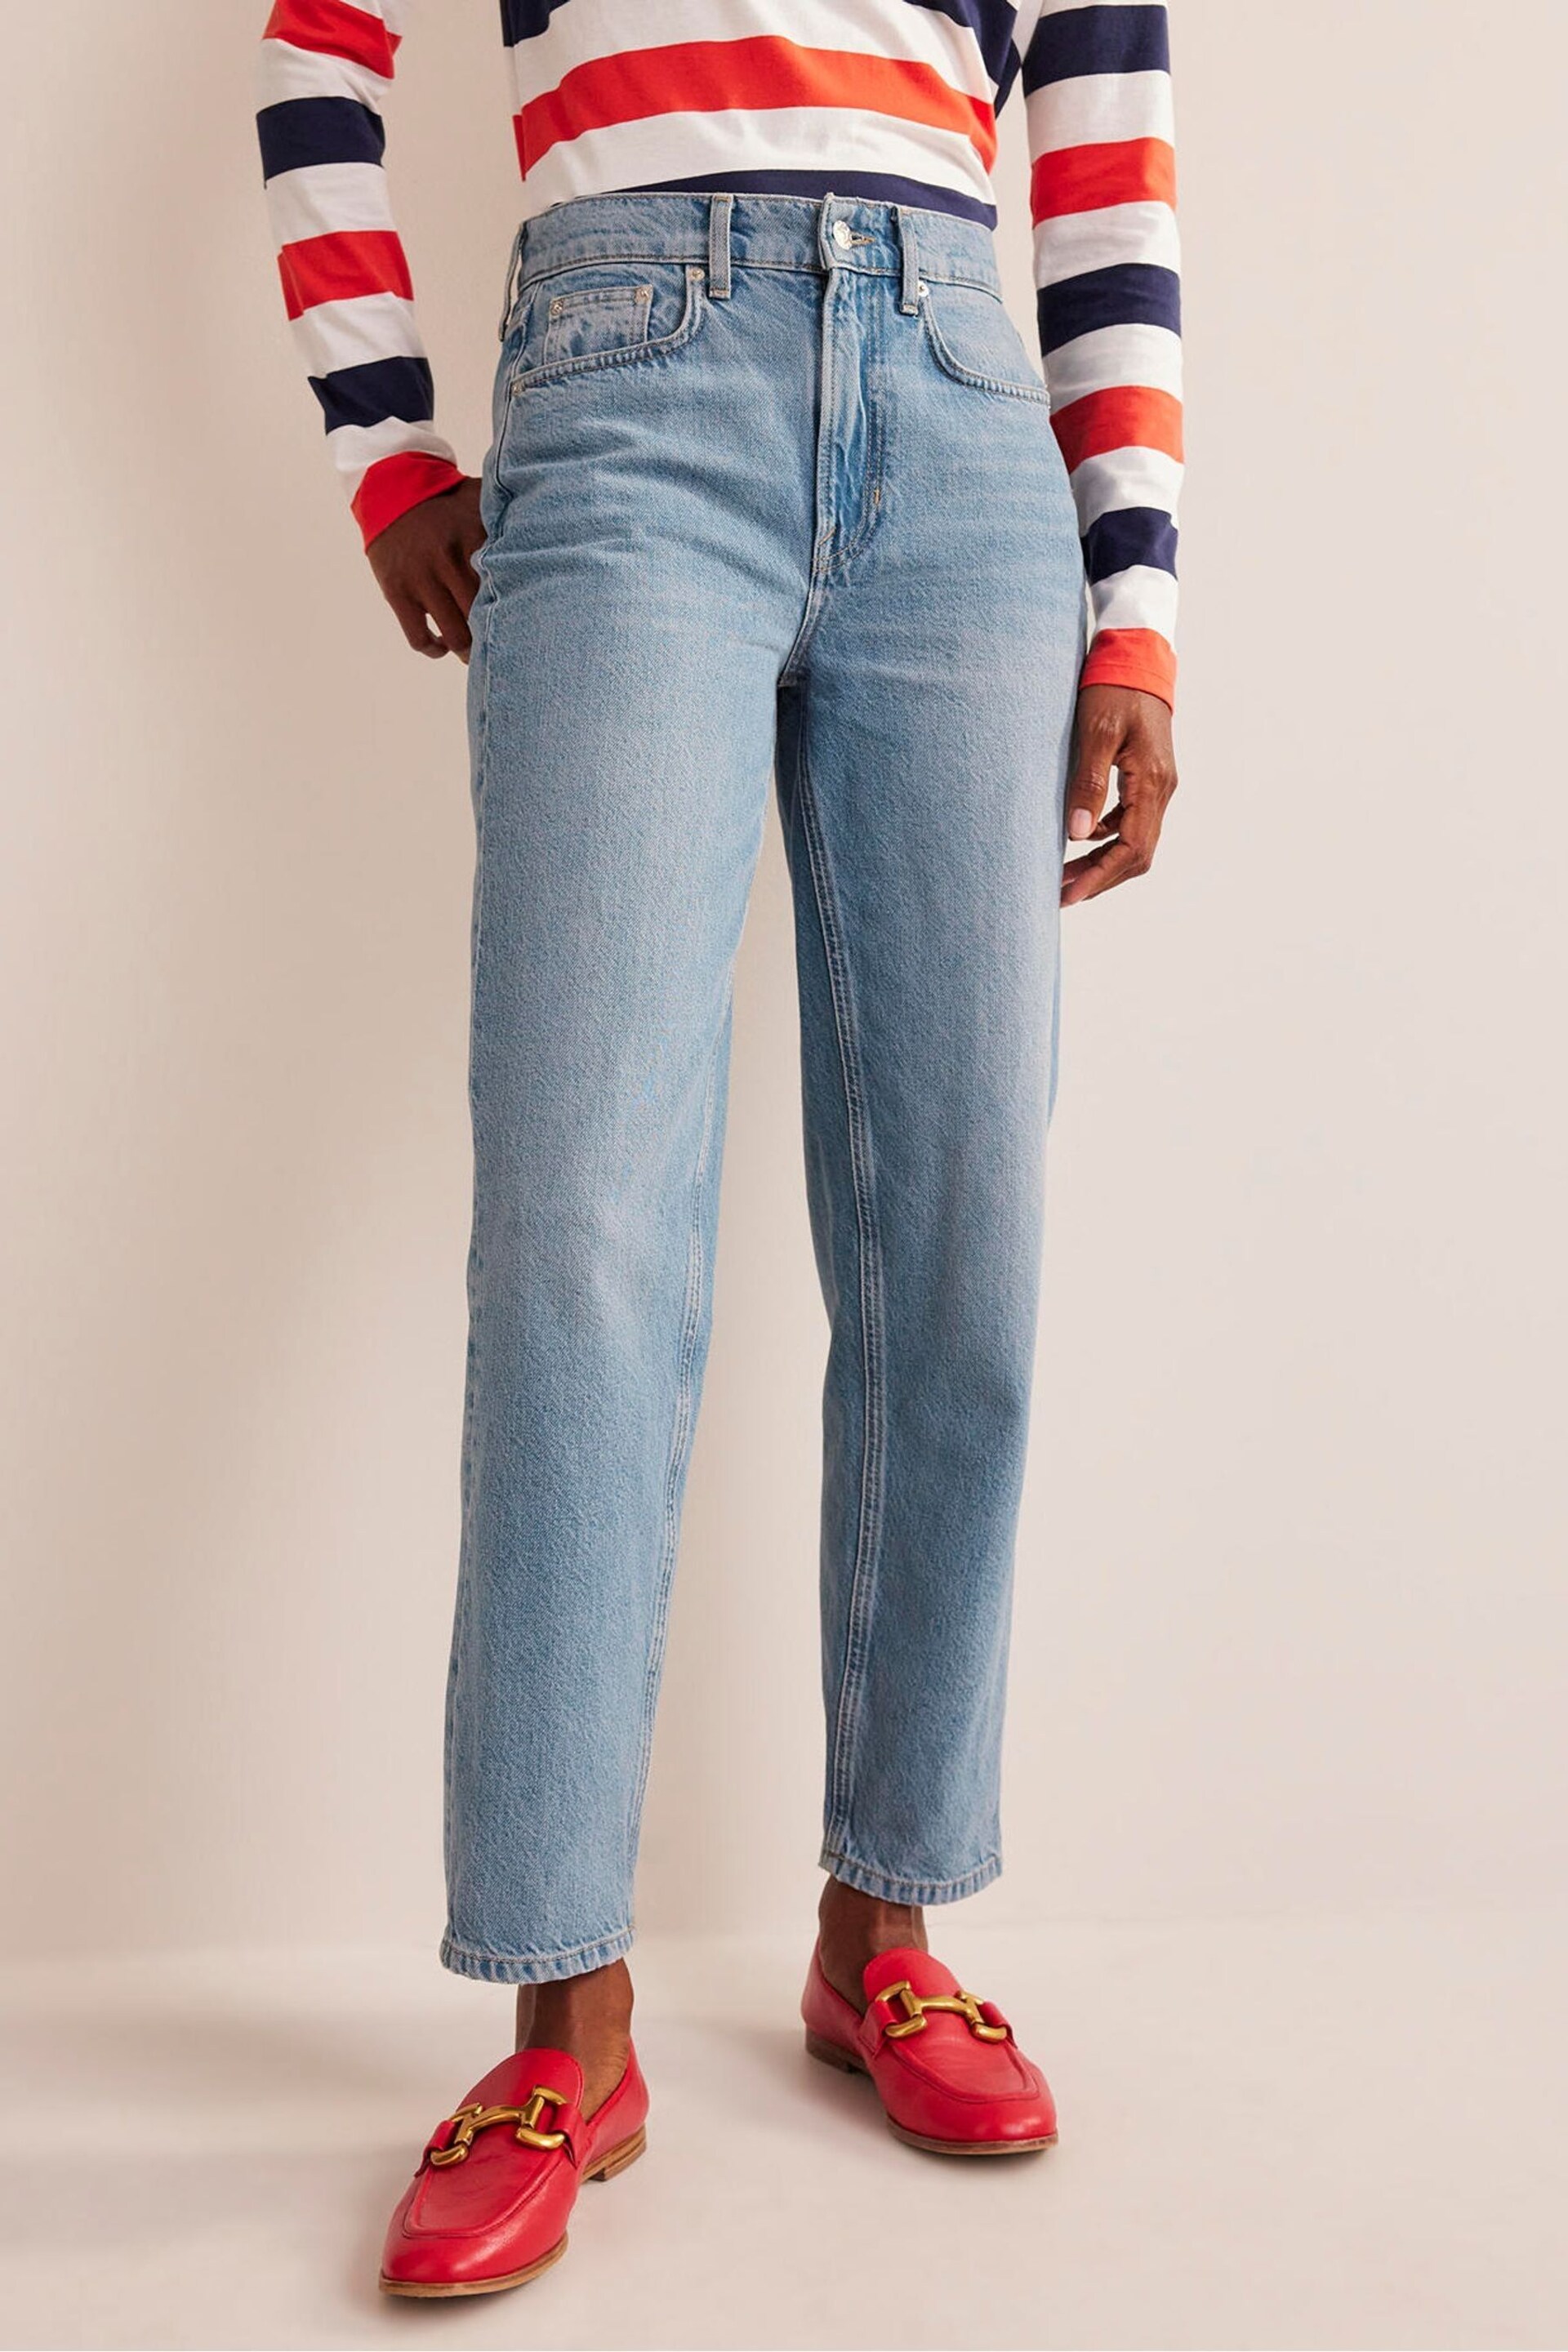 Boden Light Blue Mid Rise Tapered Jeans - Image 2 of 8